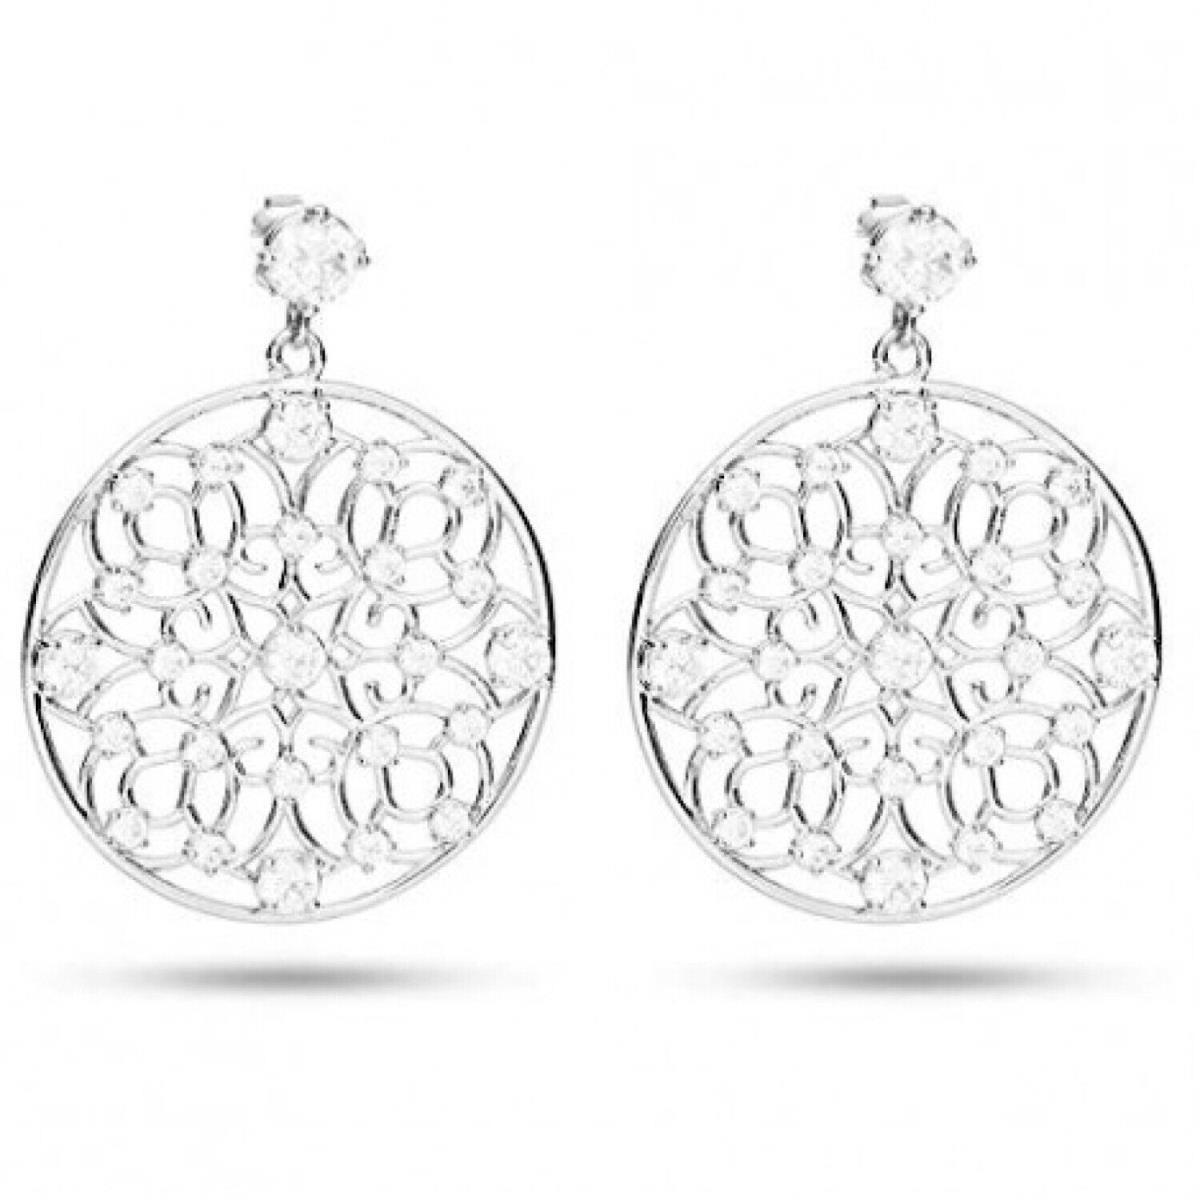 Gorgeous Brosway Cortino Earring Made with Swarovski Crystal Elements